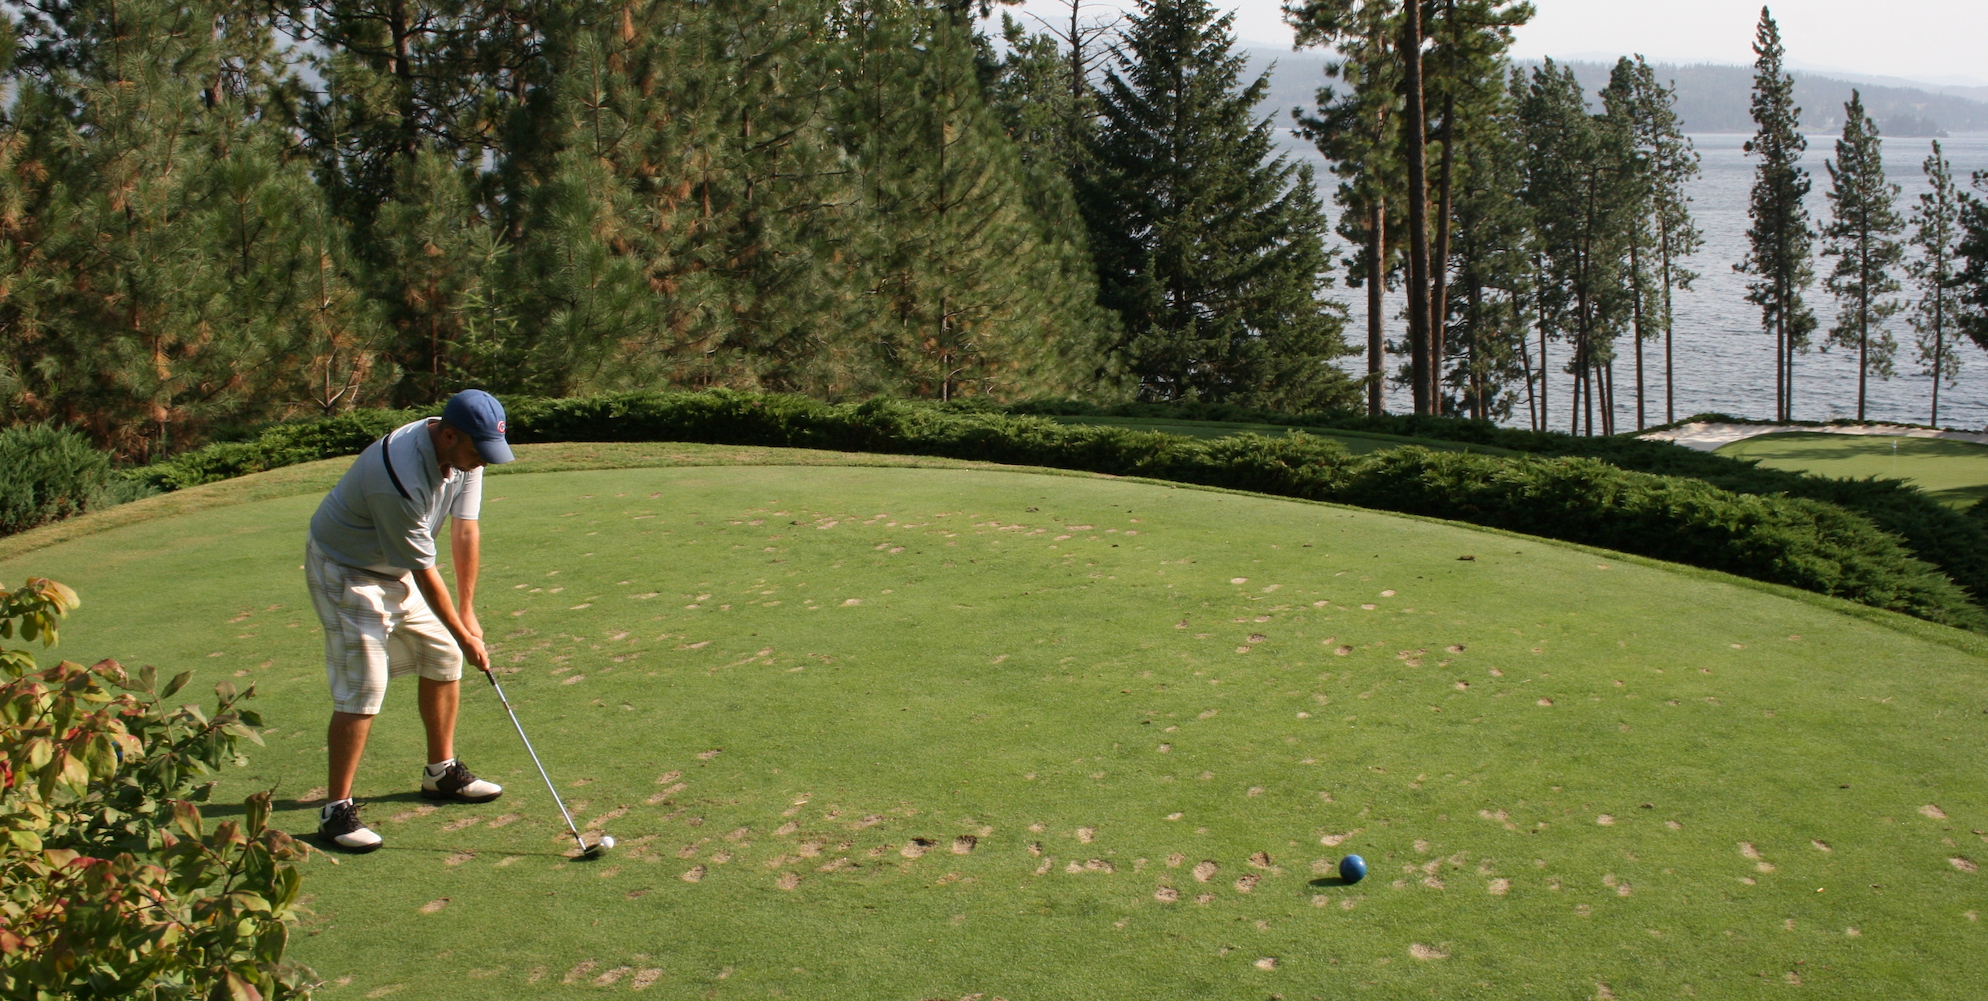 A man golfing at the Coeur D'Alene Resort in the Idaho Panhandle